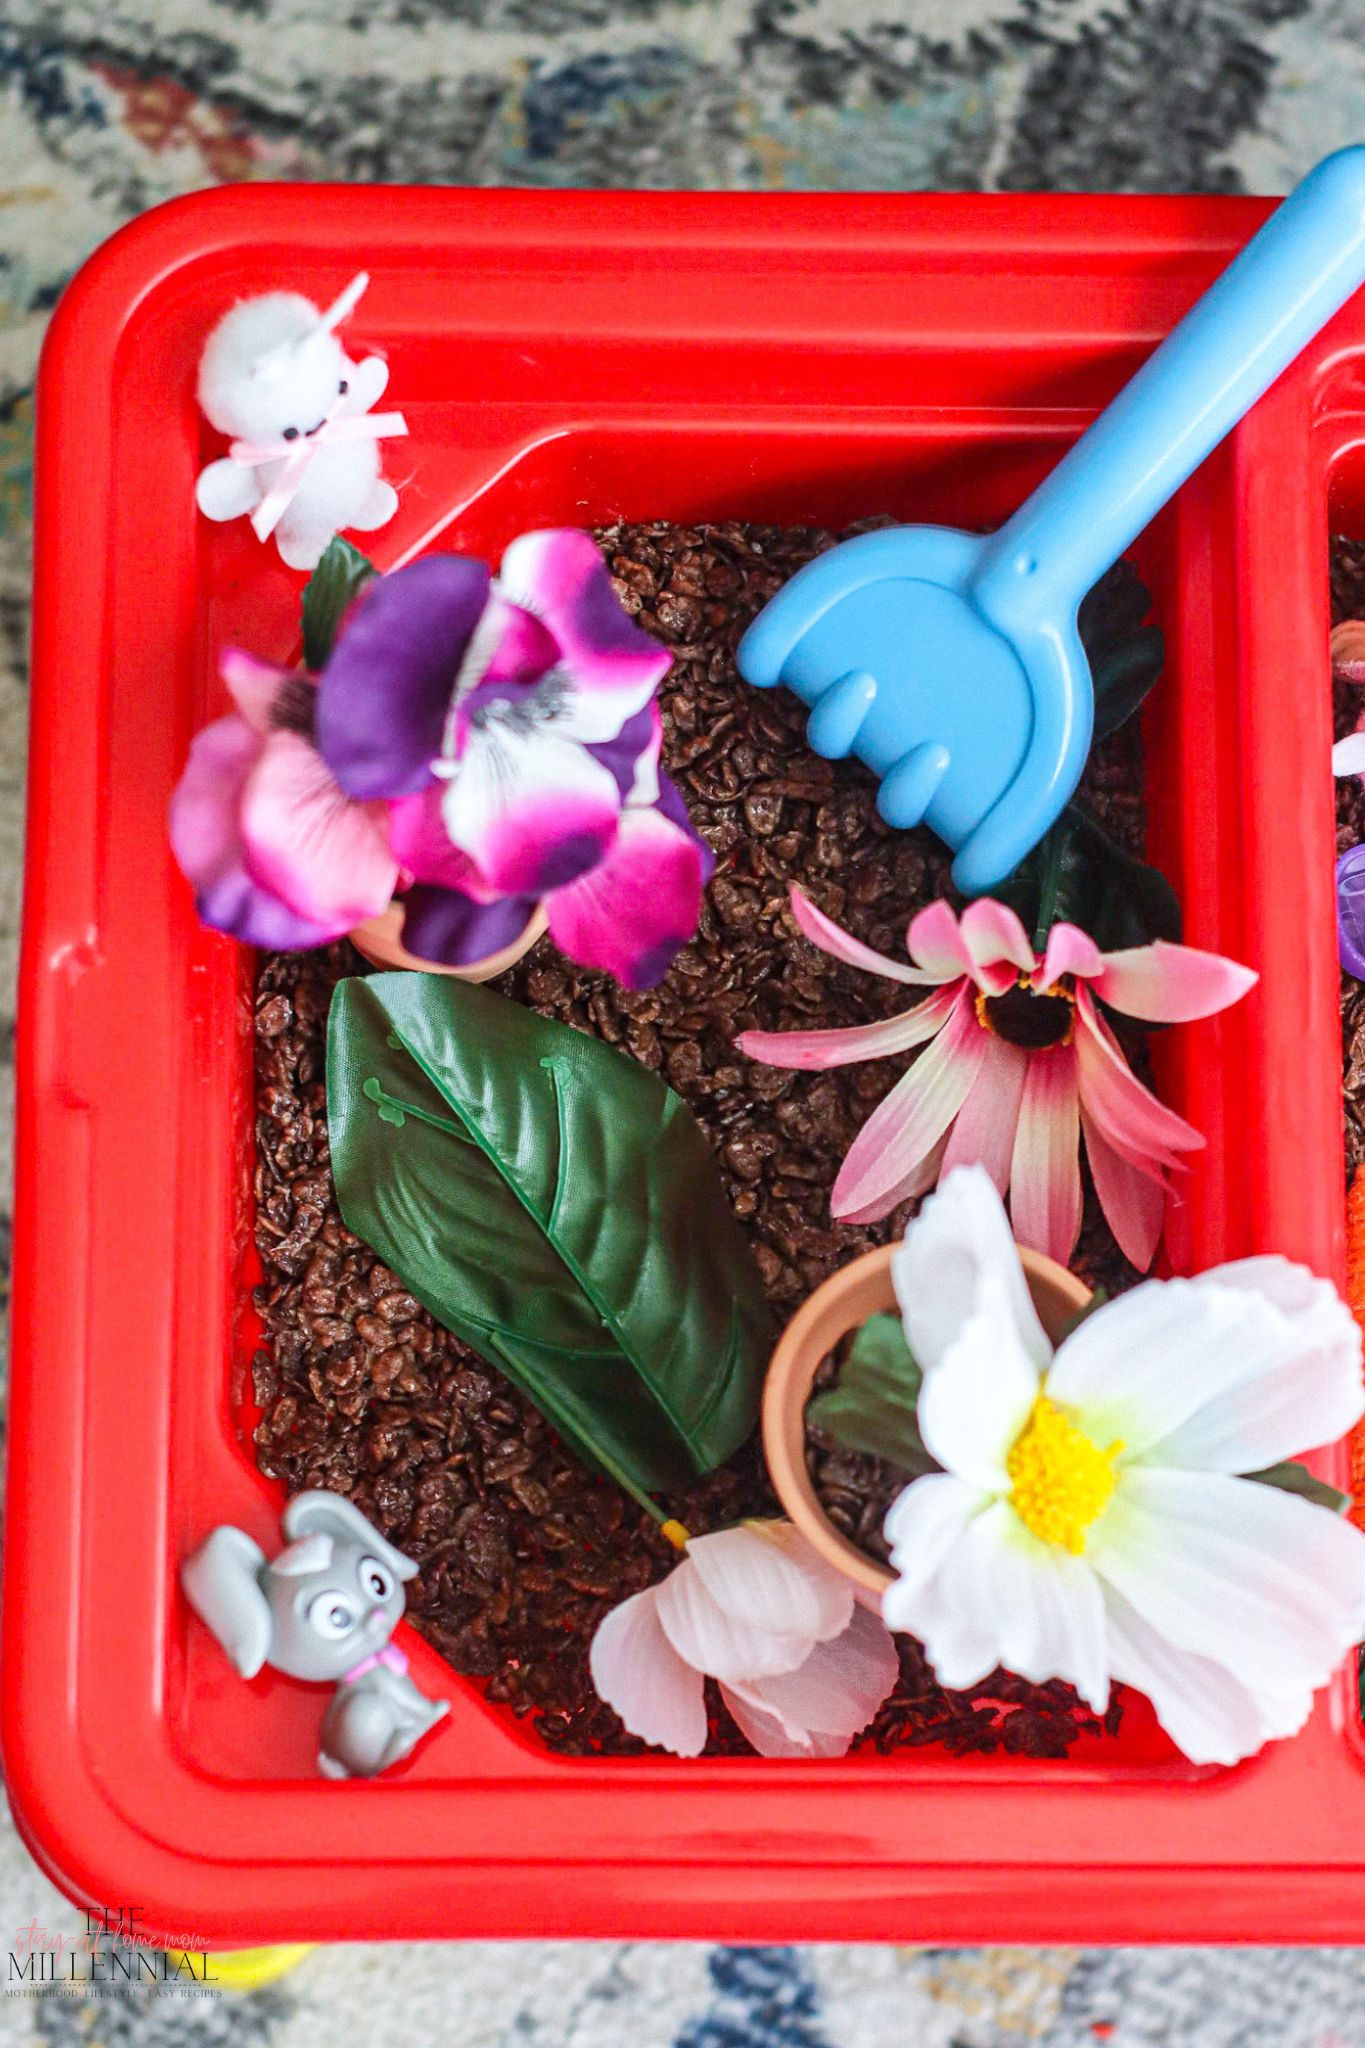 Sensory play has become a daily part of our morning routine and this garden-themed sensory table is perfect for your little learner!